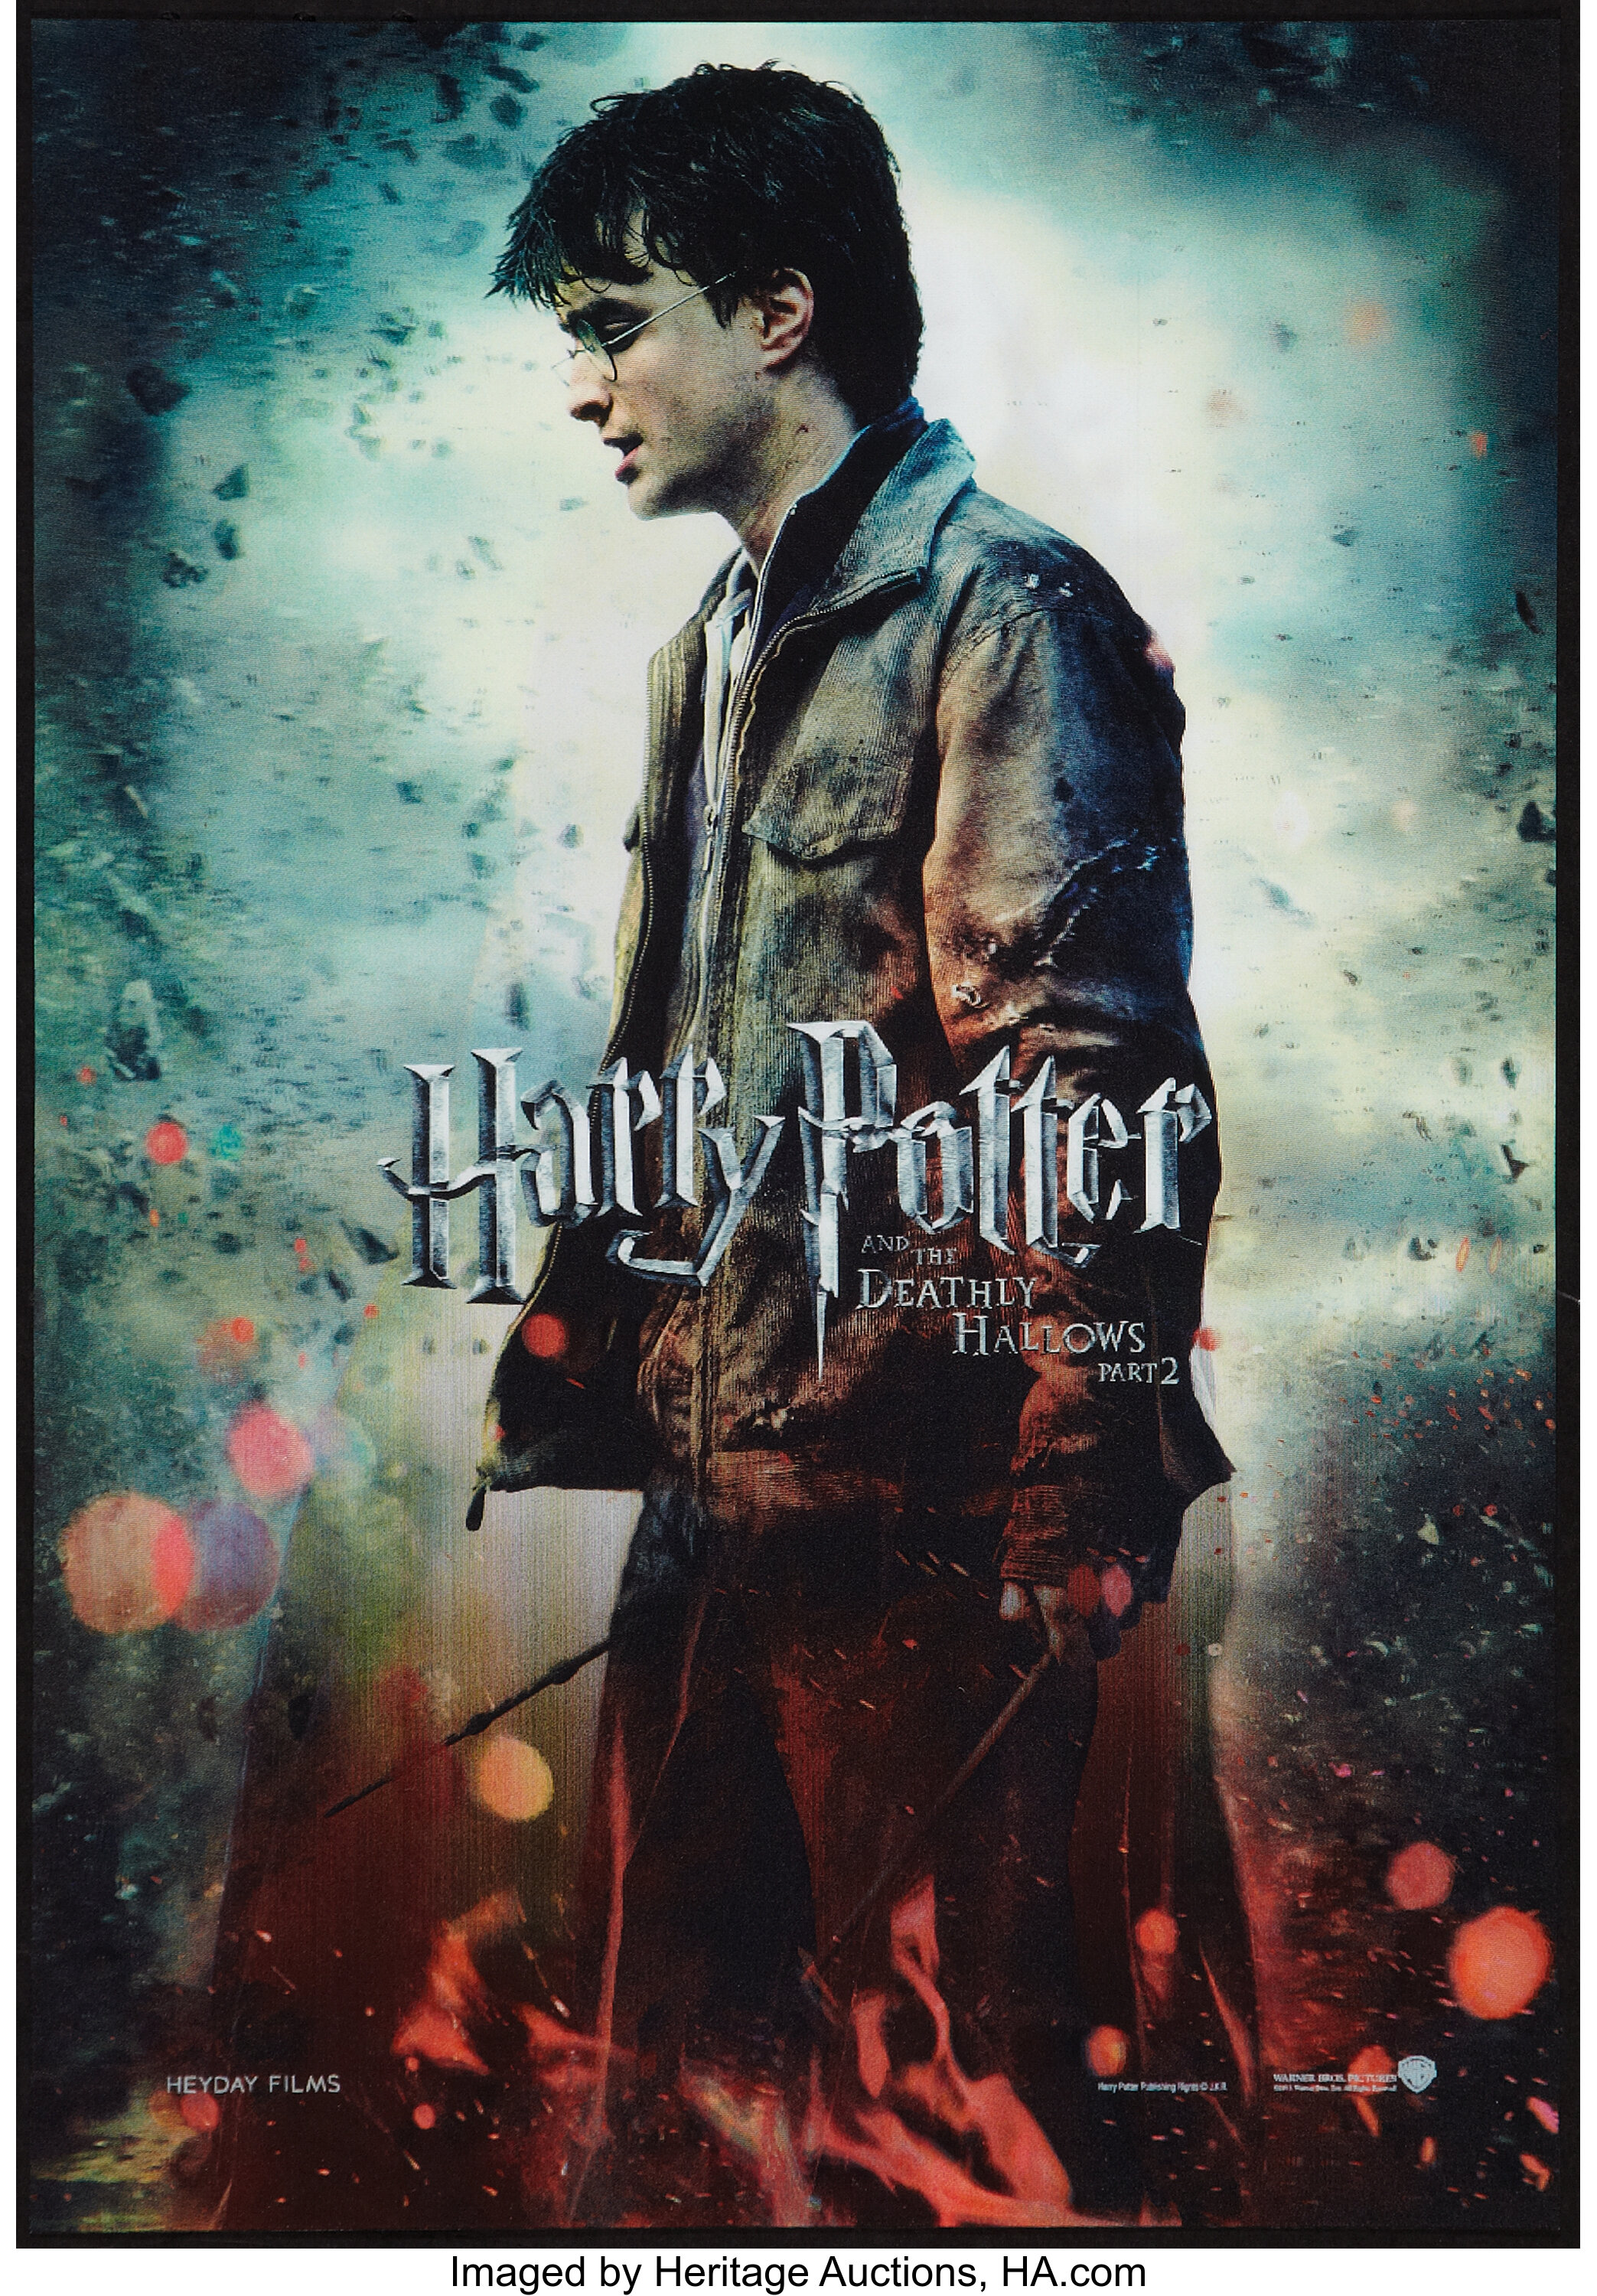 harry potter 5 movie poster